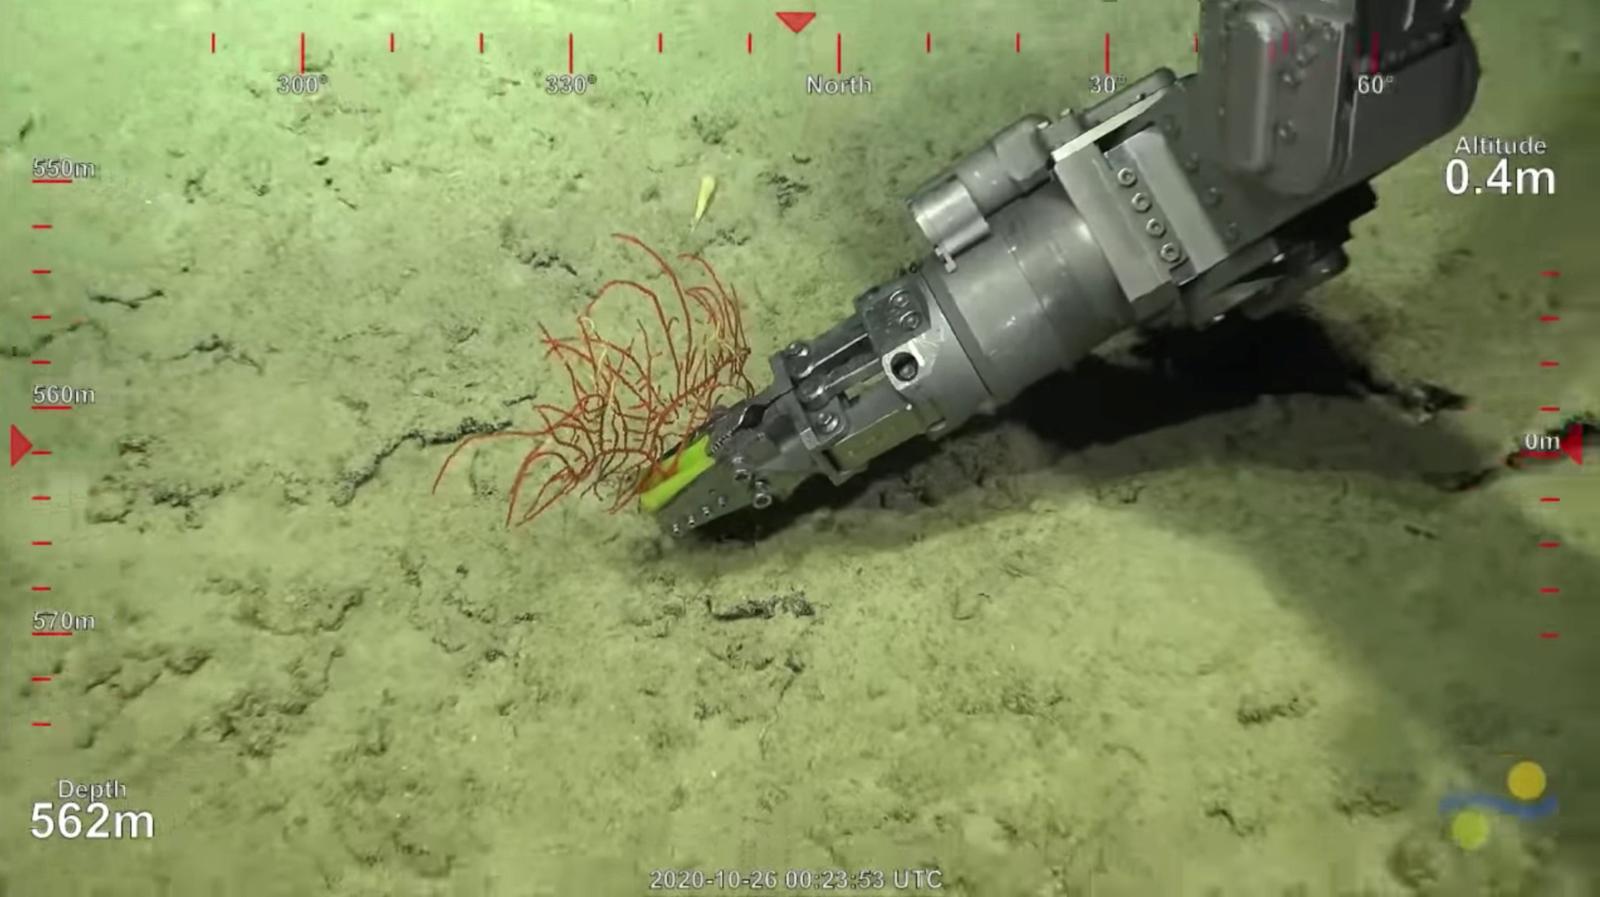 A robotic arm takes a sample from a 500-metre-tall coral reef discovered by Australian scientists, off Australia's Great Barrier Reef, in this still image taken from video provided on social media, October 25, 2020. Mandatory credit Schmidt Ocean Institute/via Reuters